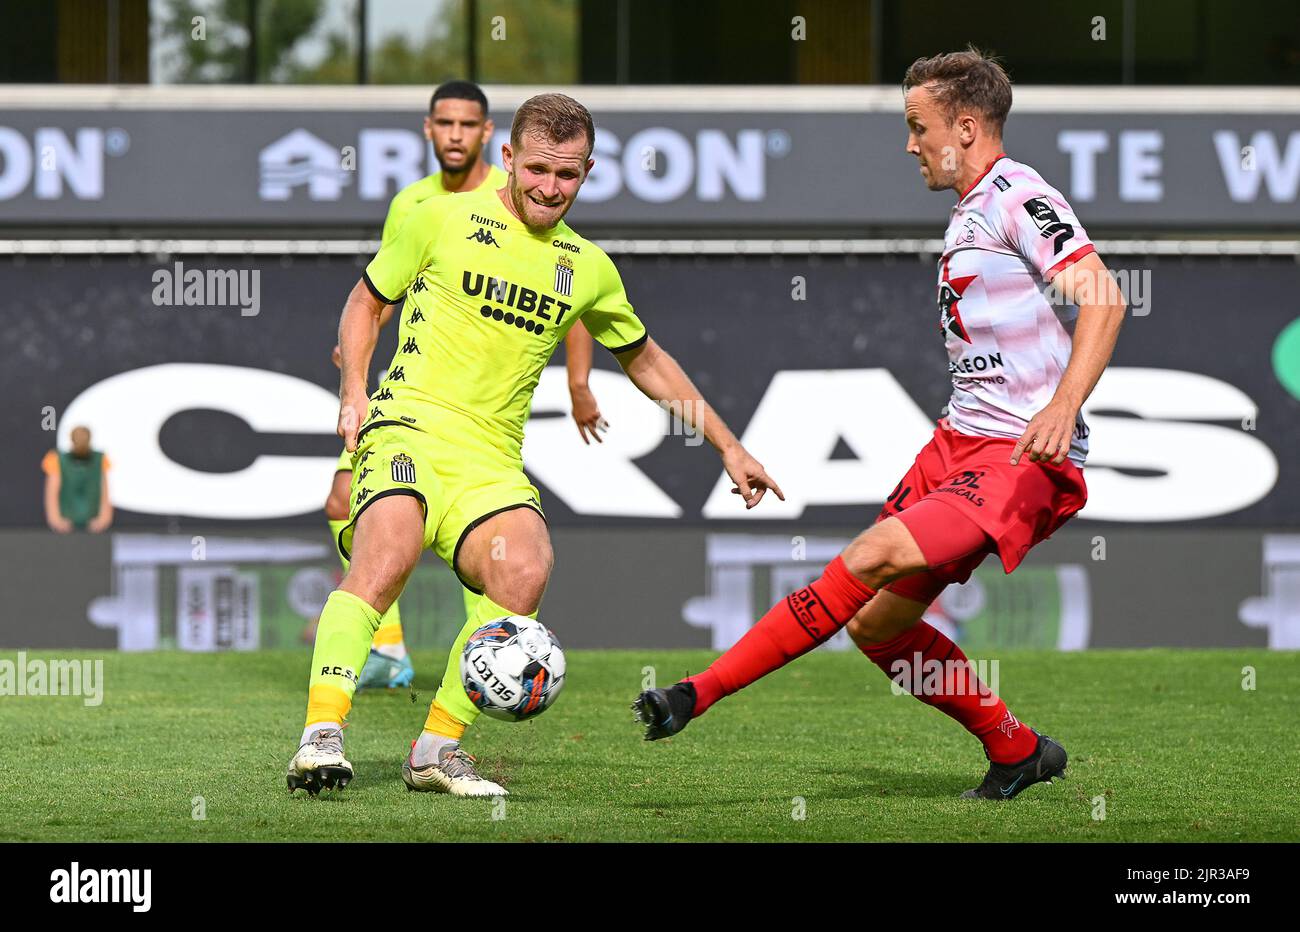 Waregem, Belgium, 21/08/2022, Charleroi's Jonas Bager and Essevee's Vigen Christensen Lasse fight for the ball during a soccer match between SV Zulte-Waregem and Sporting Charleroi, Sunday 21 August 2022 in Waregem, on day 5 of the 2022-2023 'Jupiler Pro League' first division of the Belgian championship. BELGA PHOTO DAVID CATRY Stock Photo